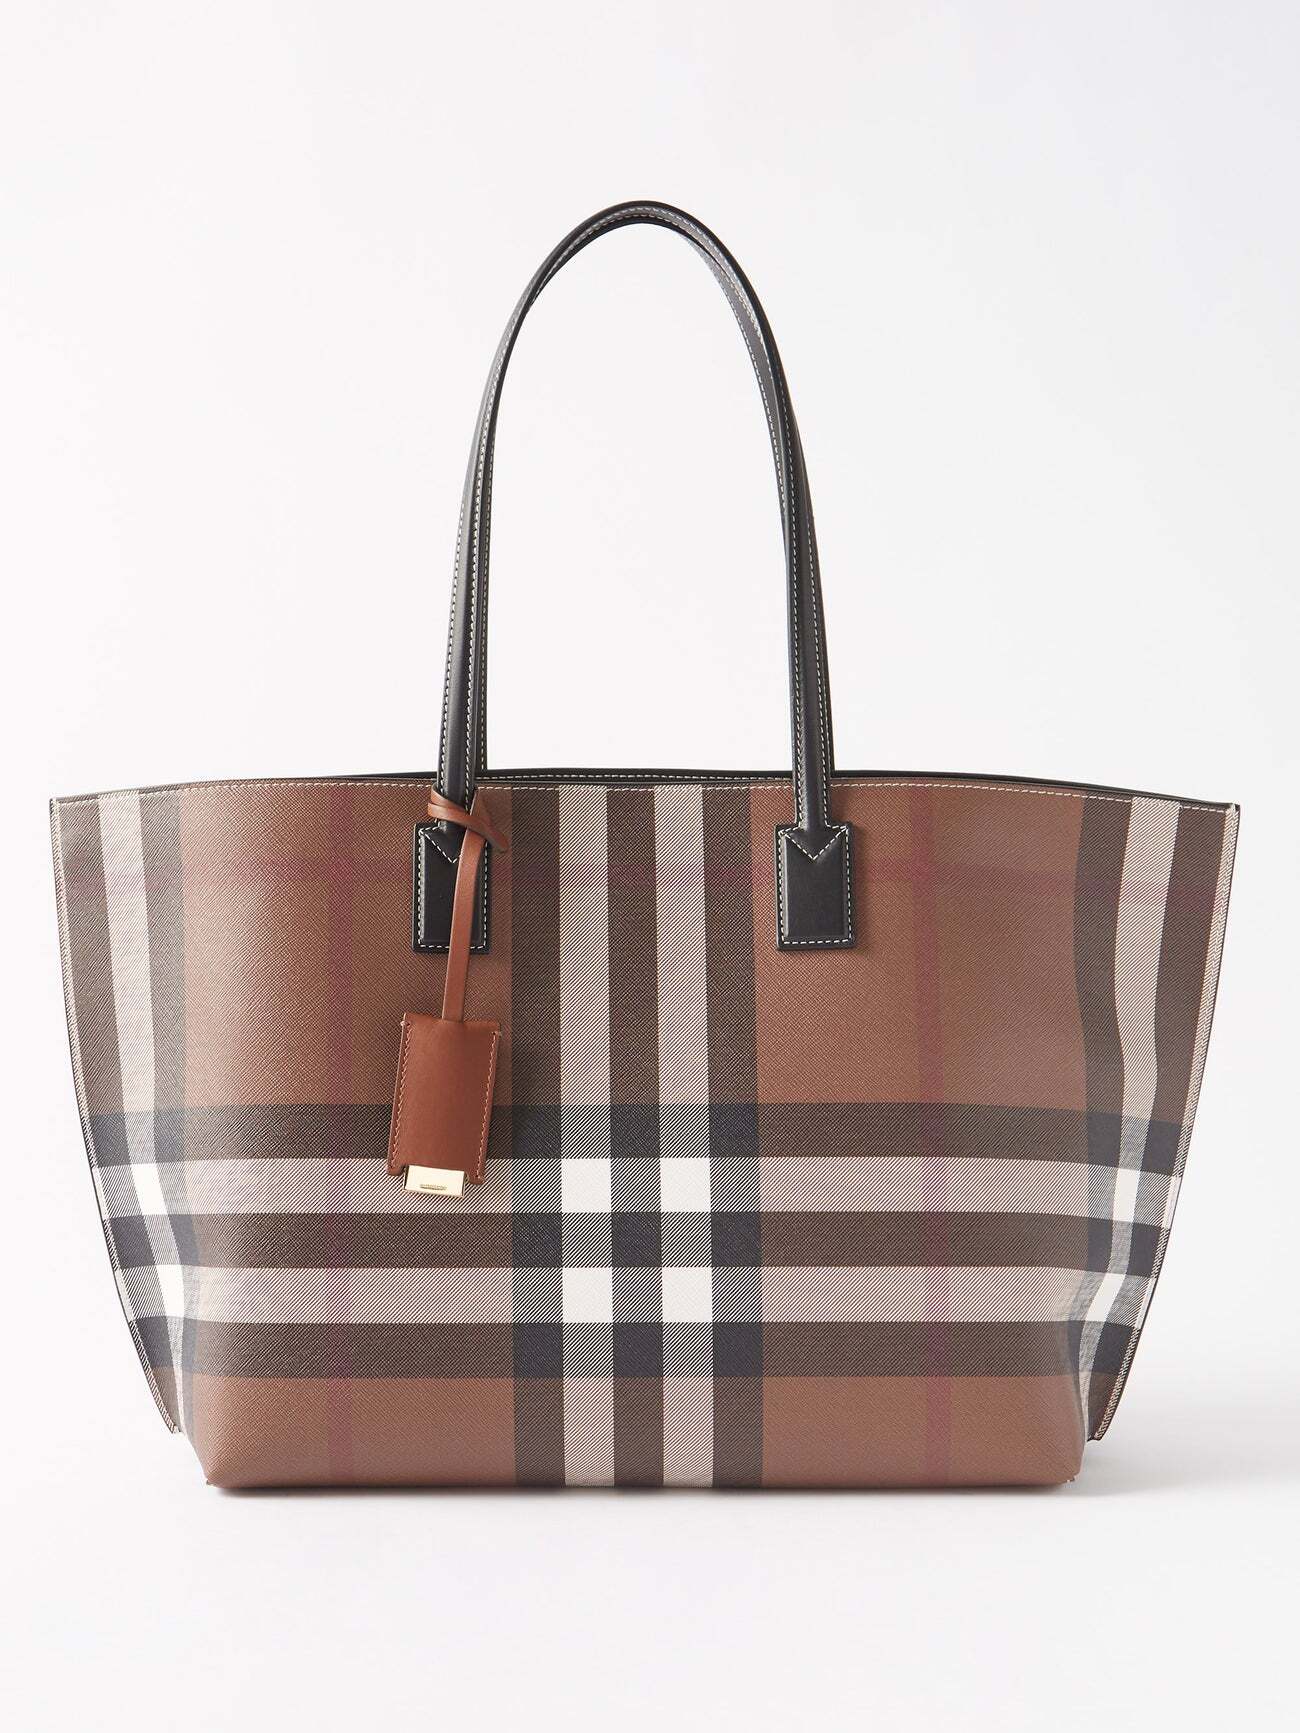 Burberry - Checked Canvas Tote Bag - Womens - Brown Multi